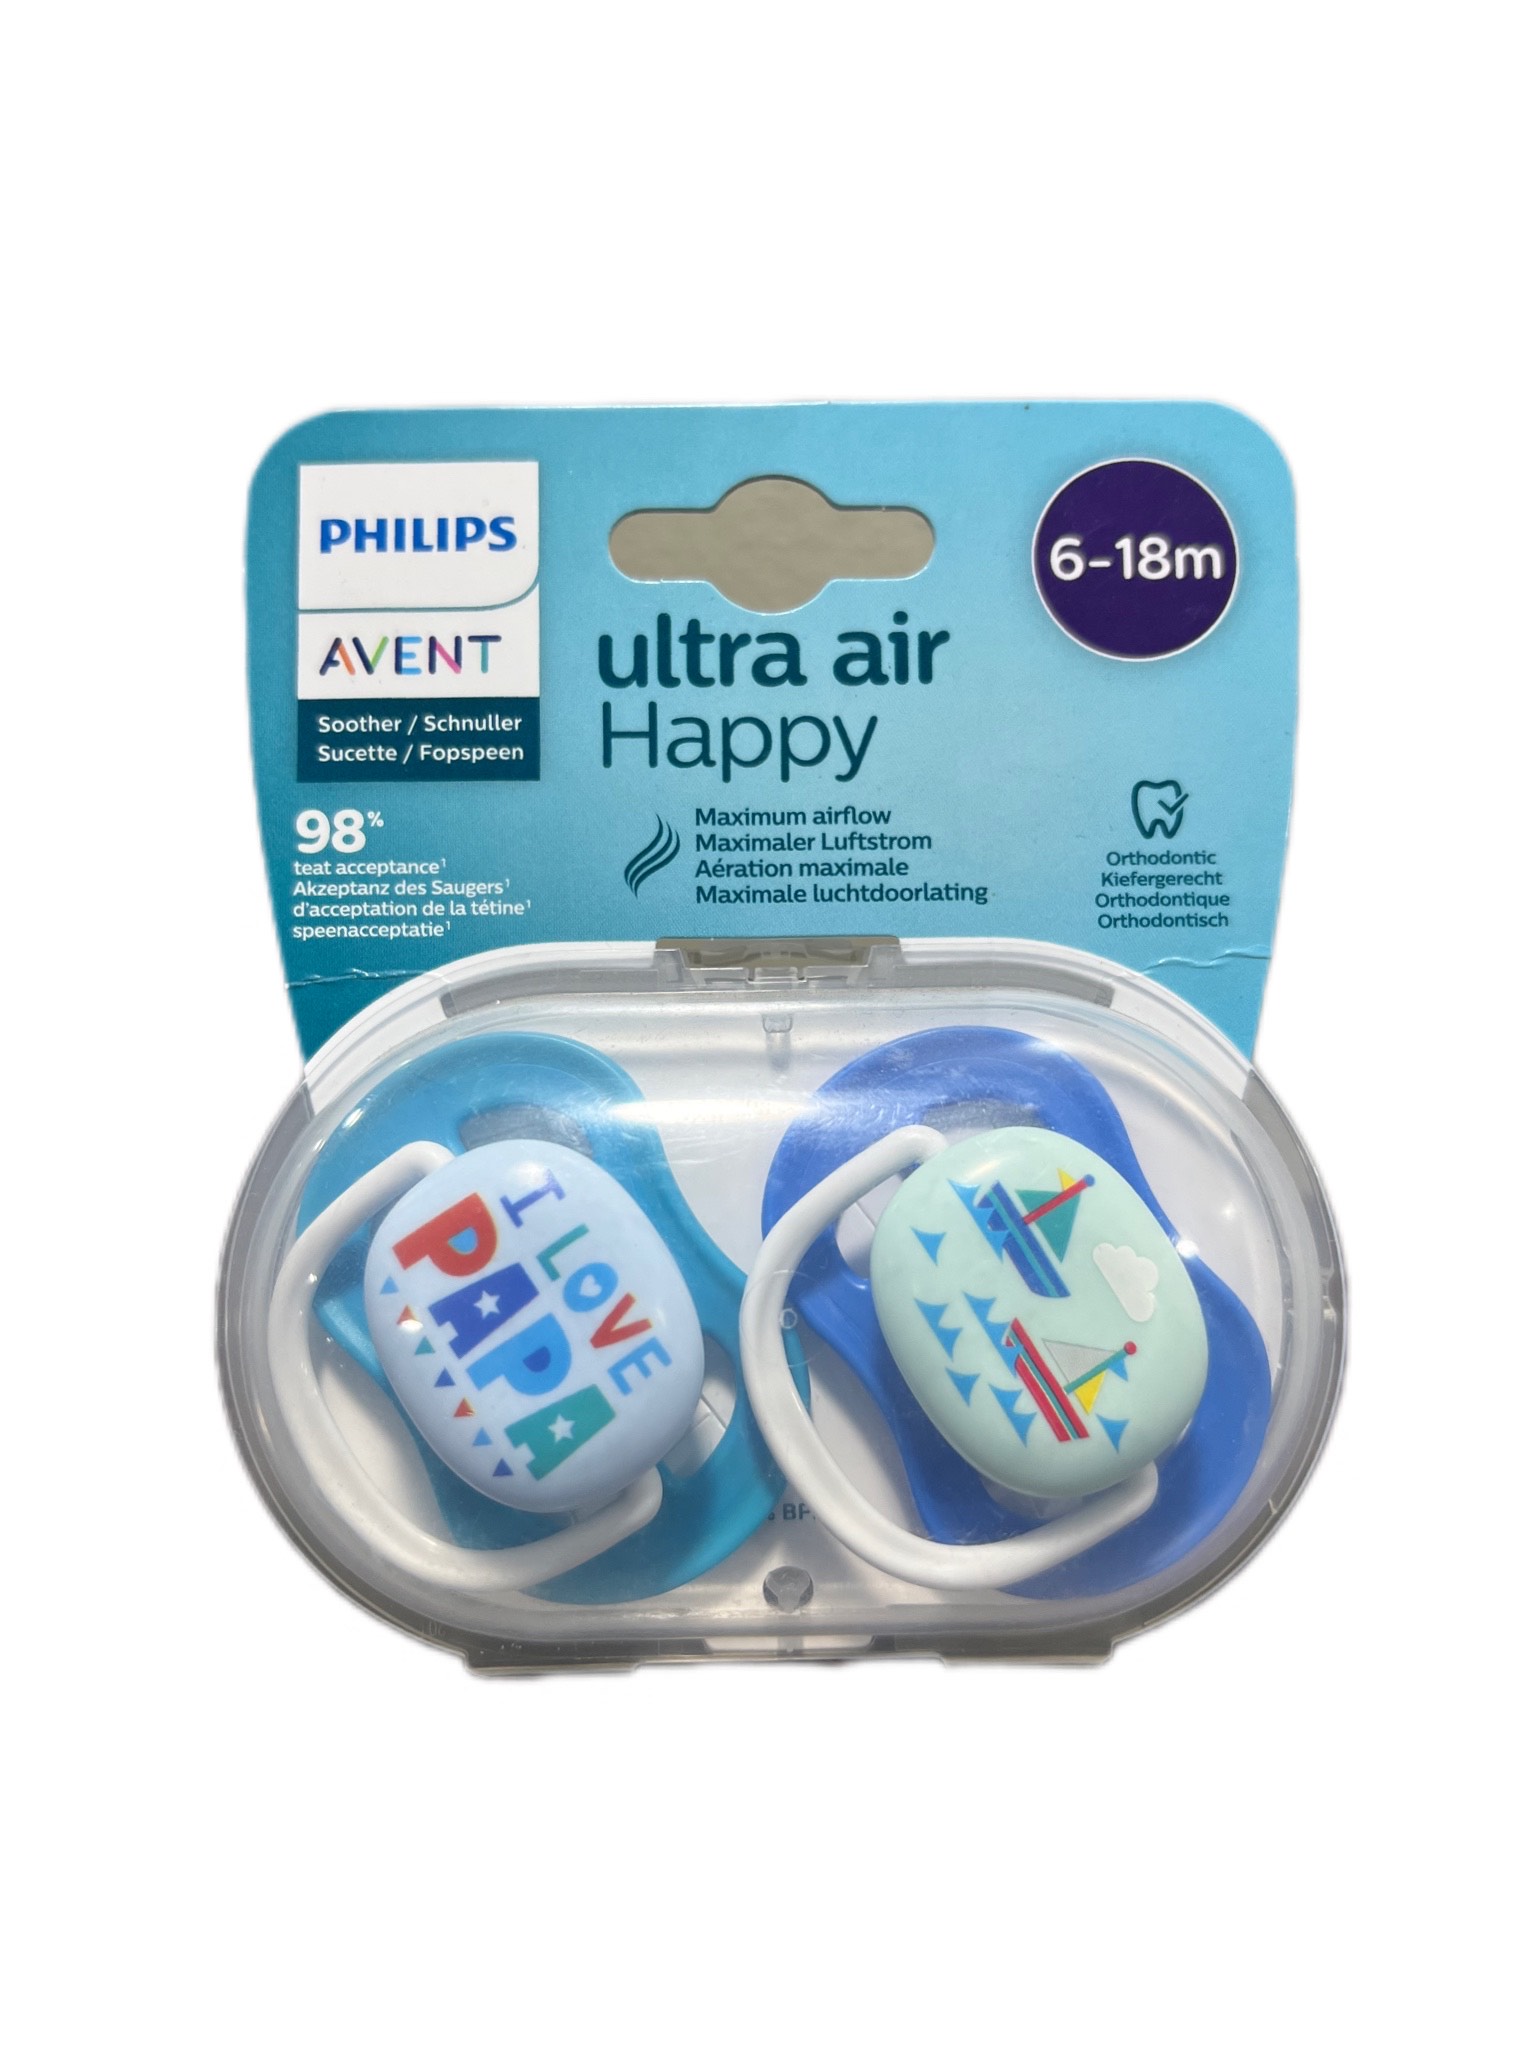 AVENT SUCETTE ULTRA AIR HAPPY 6-18MOIS+ - Parales3a